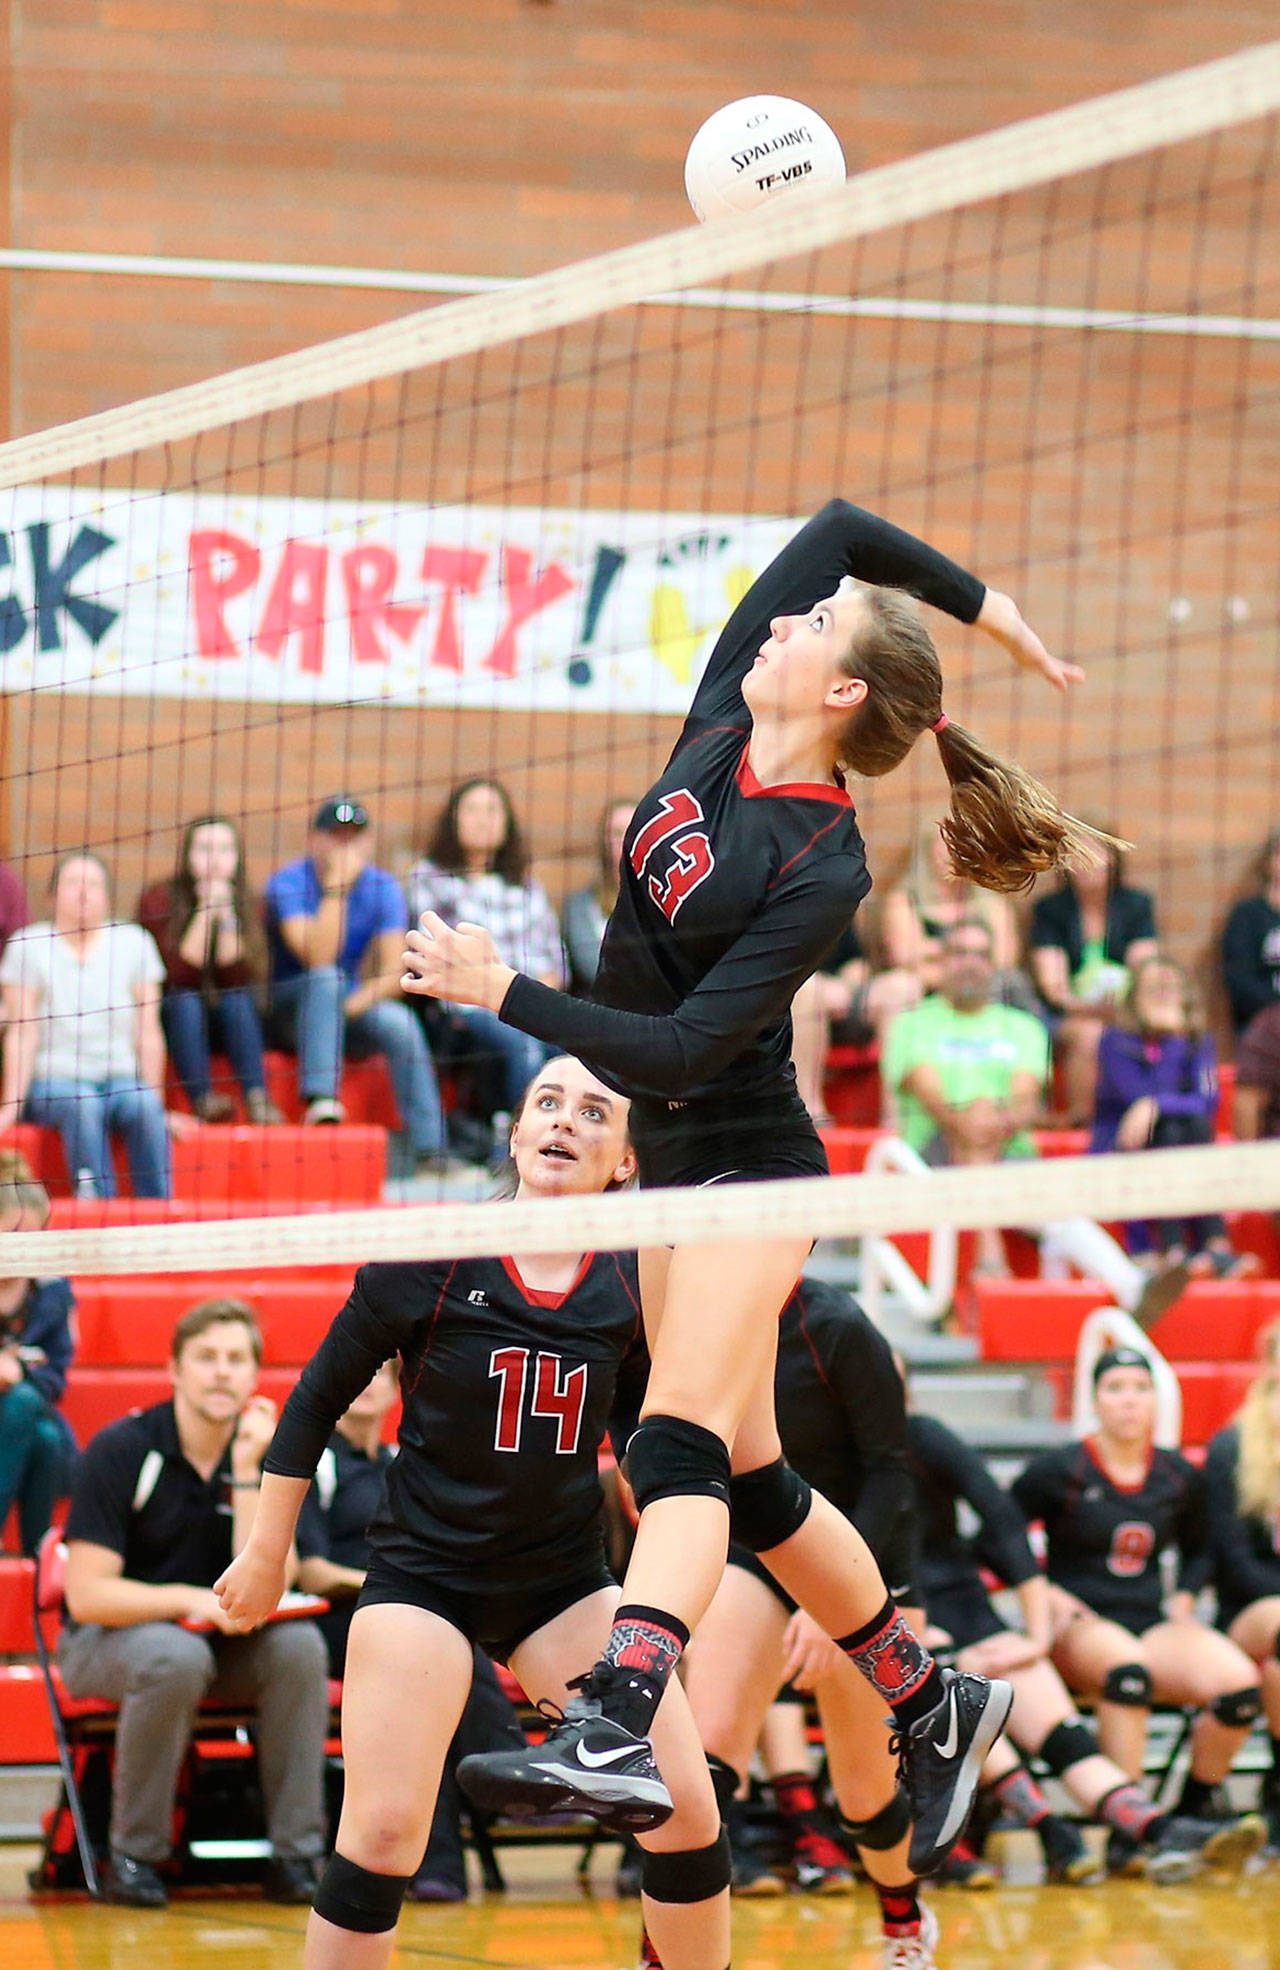 Emma Smith returns to lead the Coupeville attack this fall. (Photo by John Fisken)